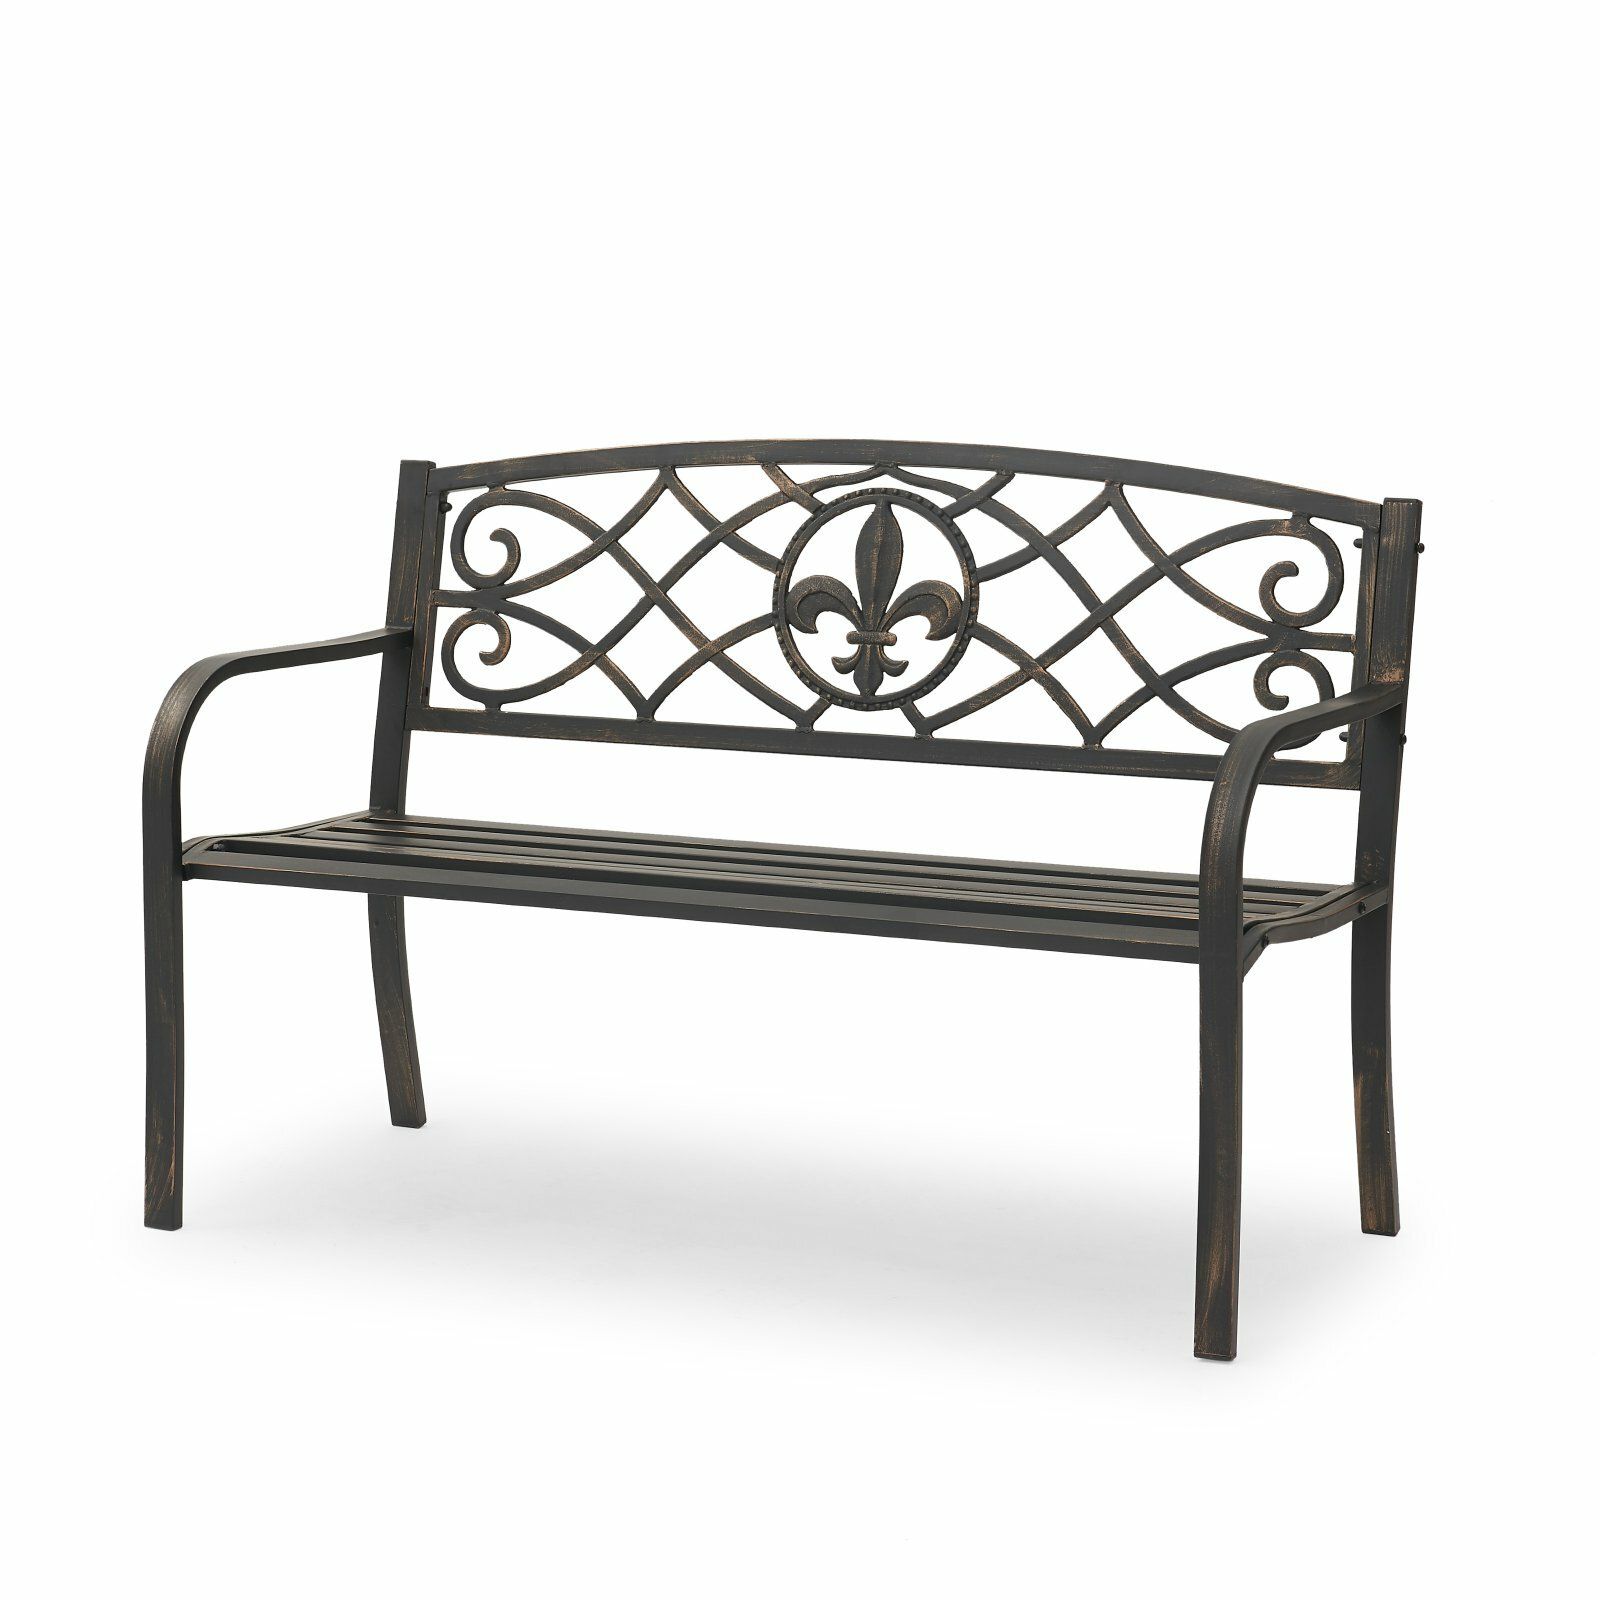 Tattnall Royal Curved Metal Park Bench Inside Zev Blue Fish Metal Garden Benches (View 7 of 25)